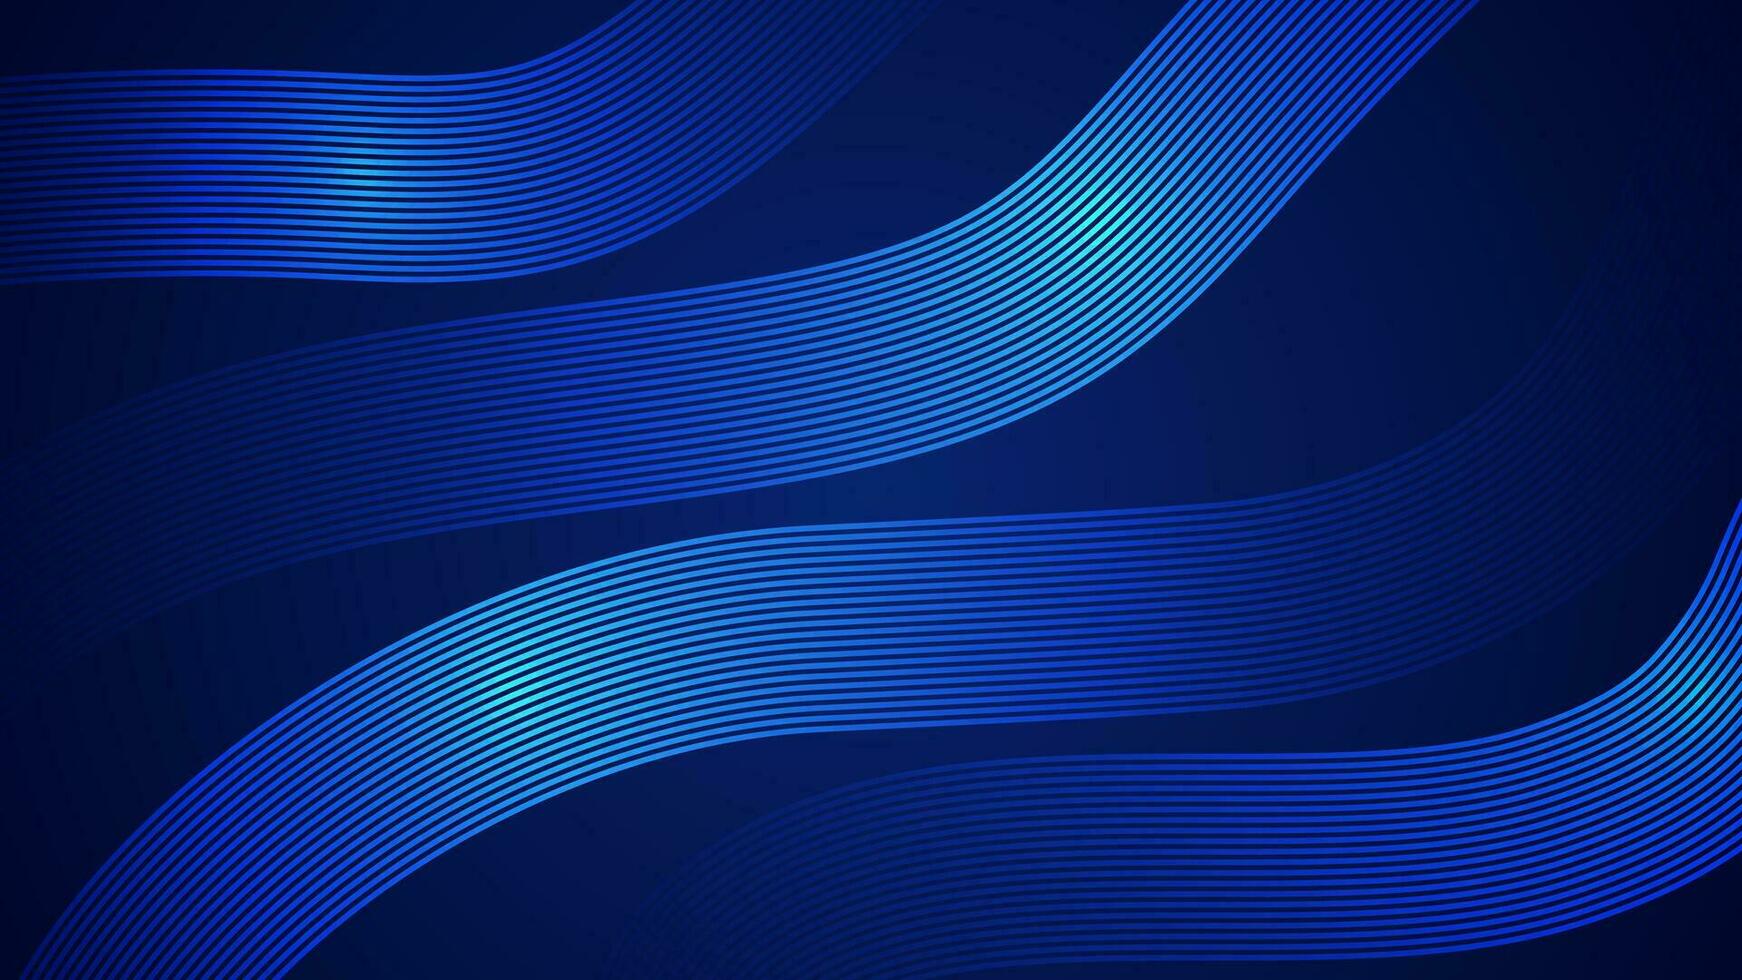 Dark blue abstract background with wave style lines as the main element. vector